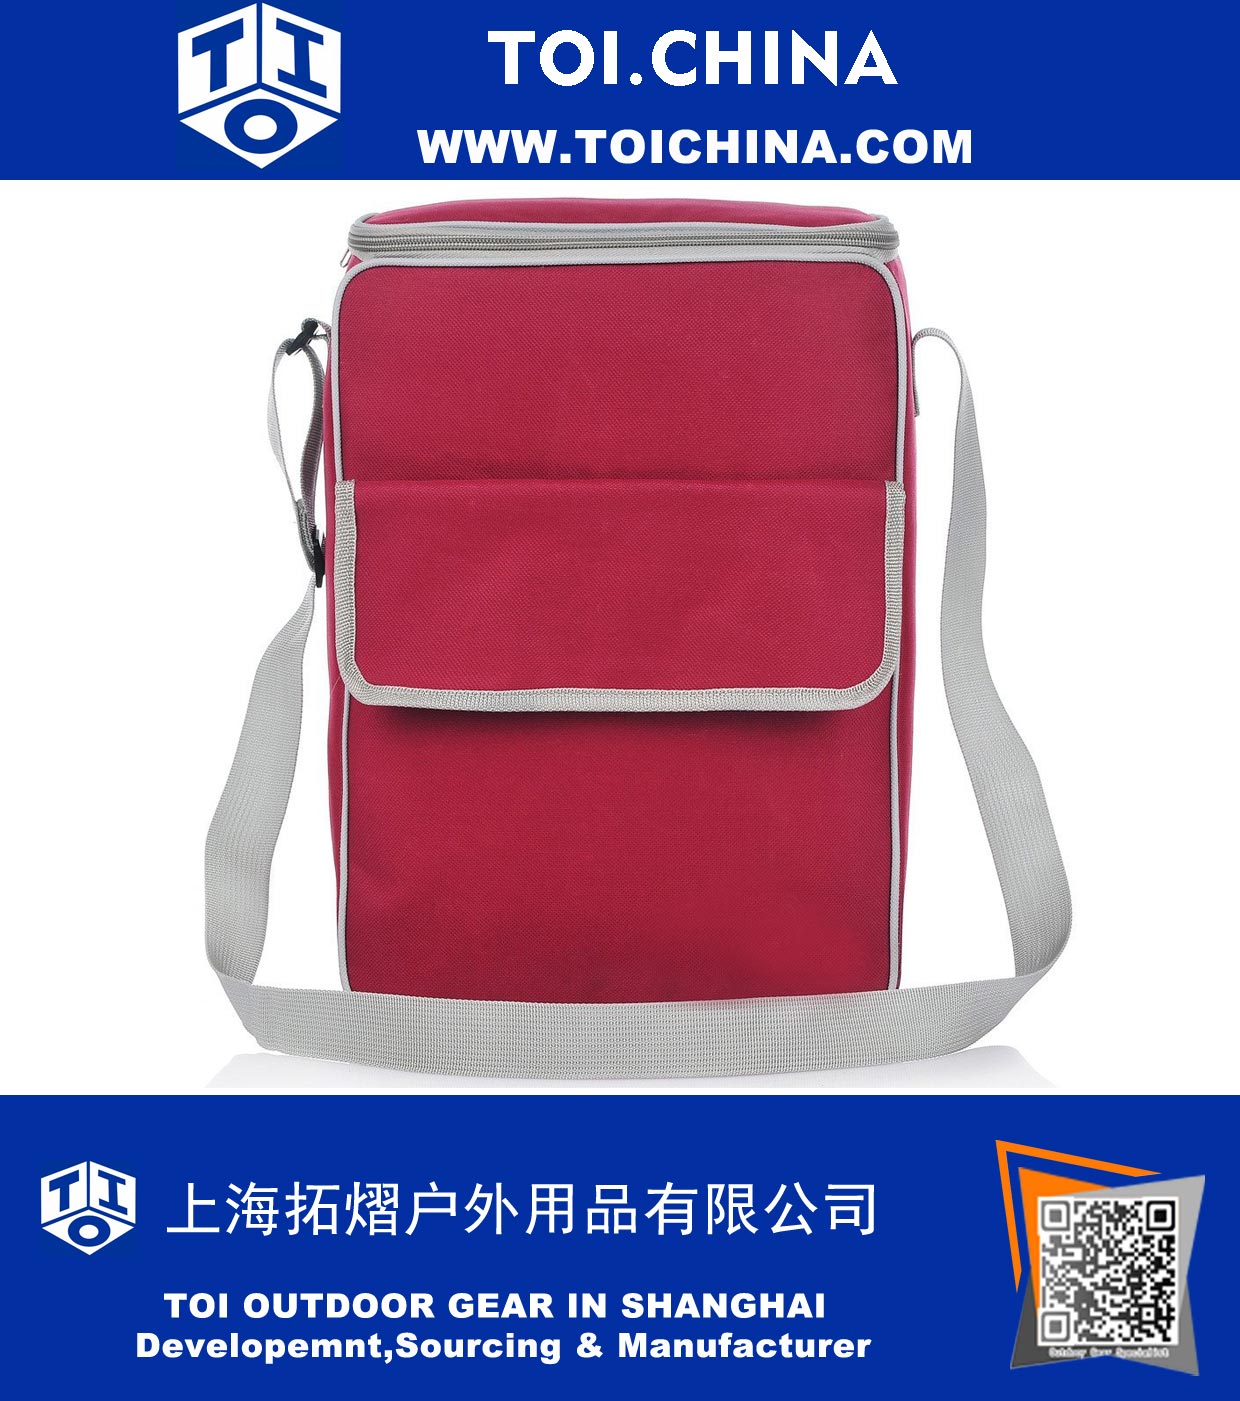 Lunch Cooler Tote Bag